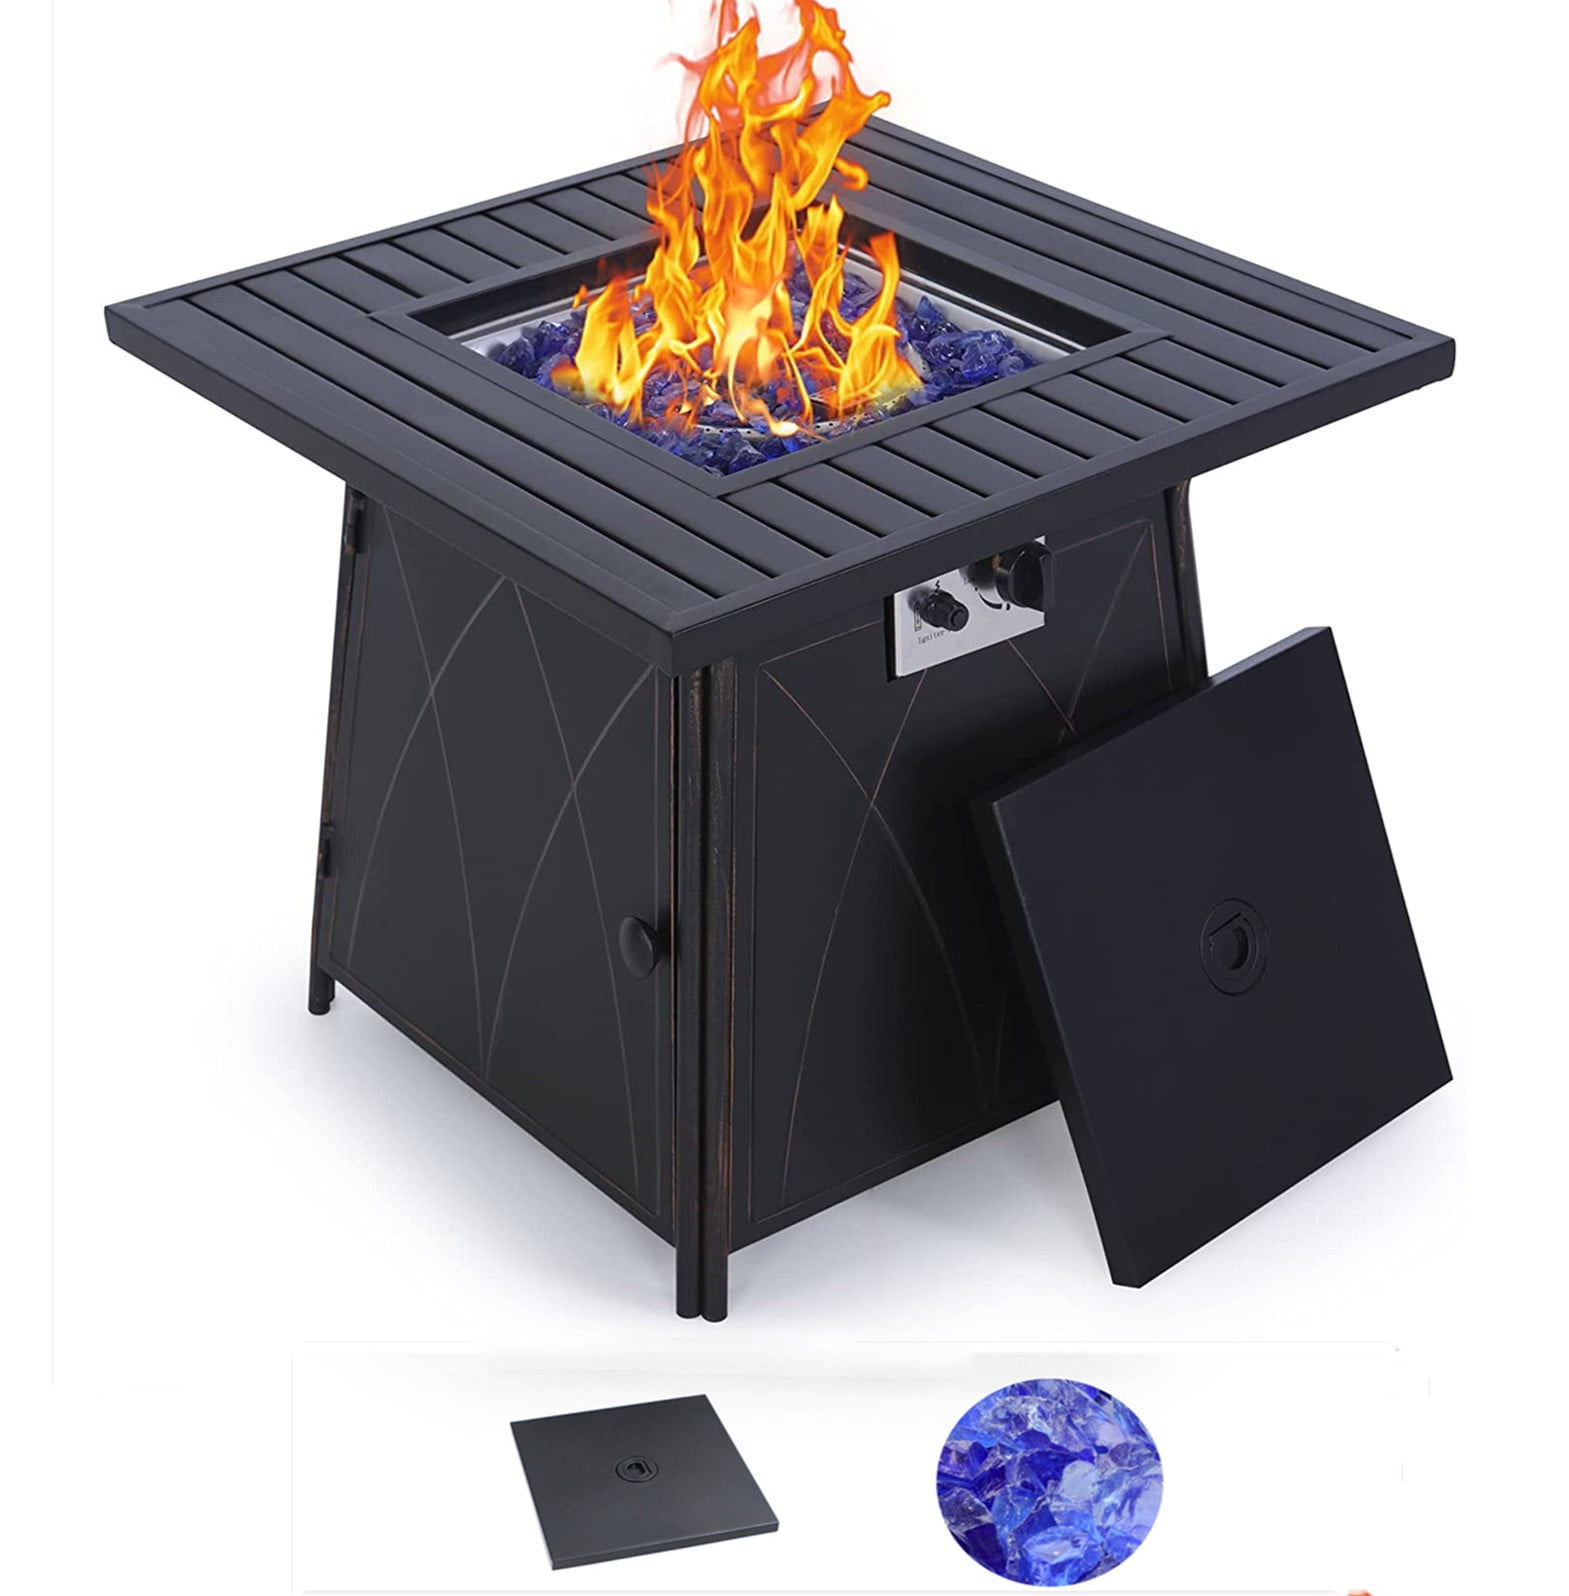 Mf Studio Gas Fire Pit Table 28 Inch, Blue Flame Fire Pit